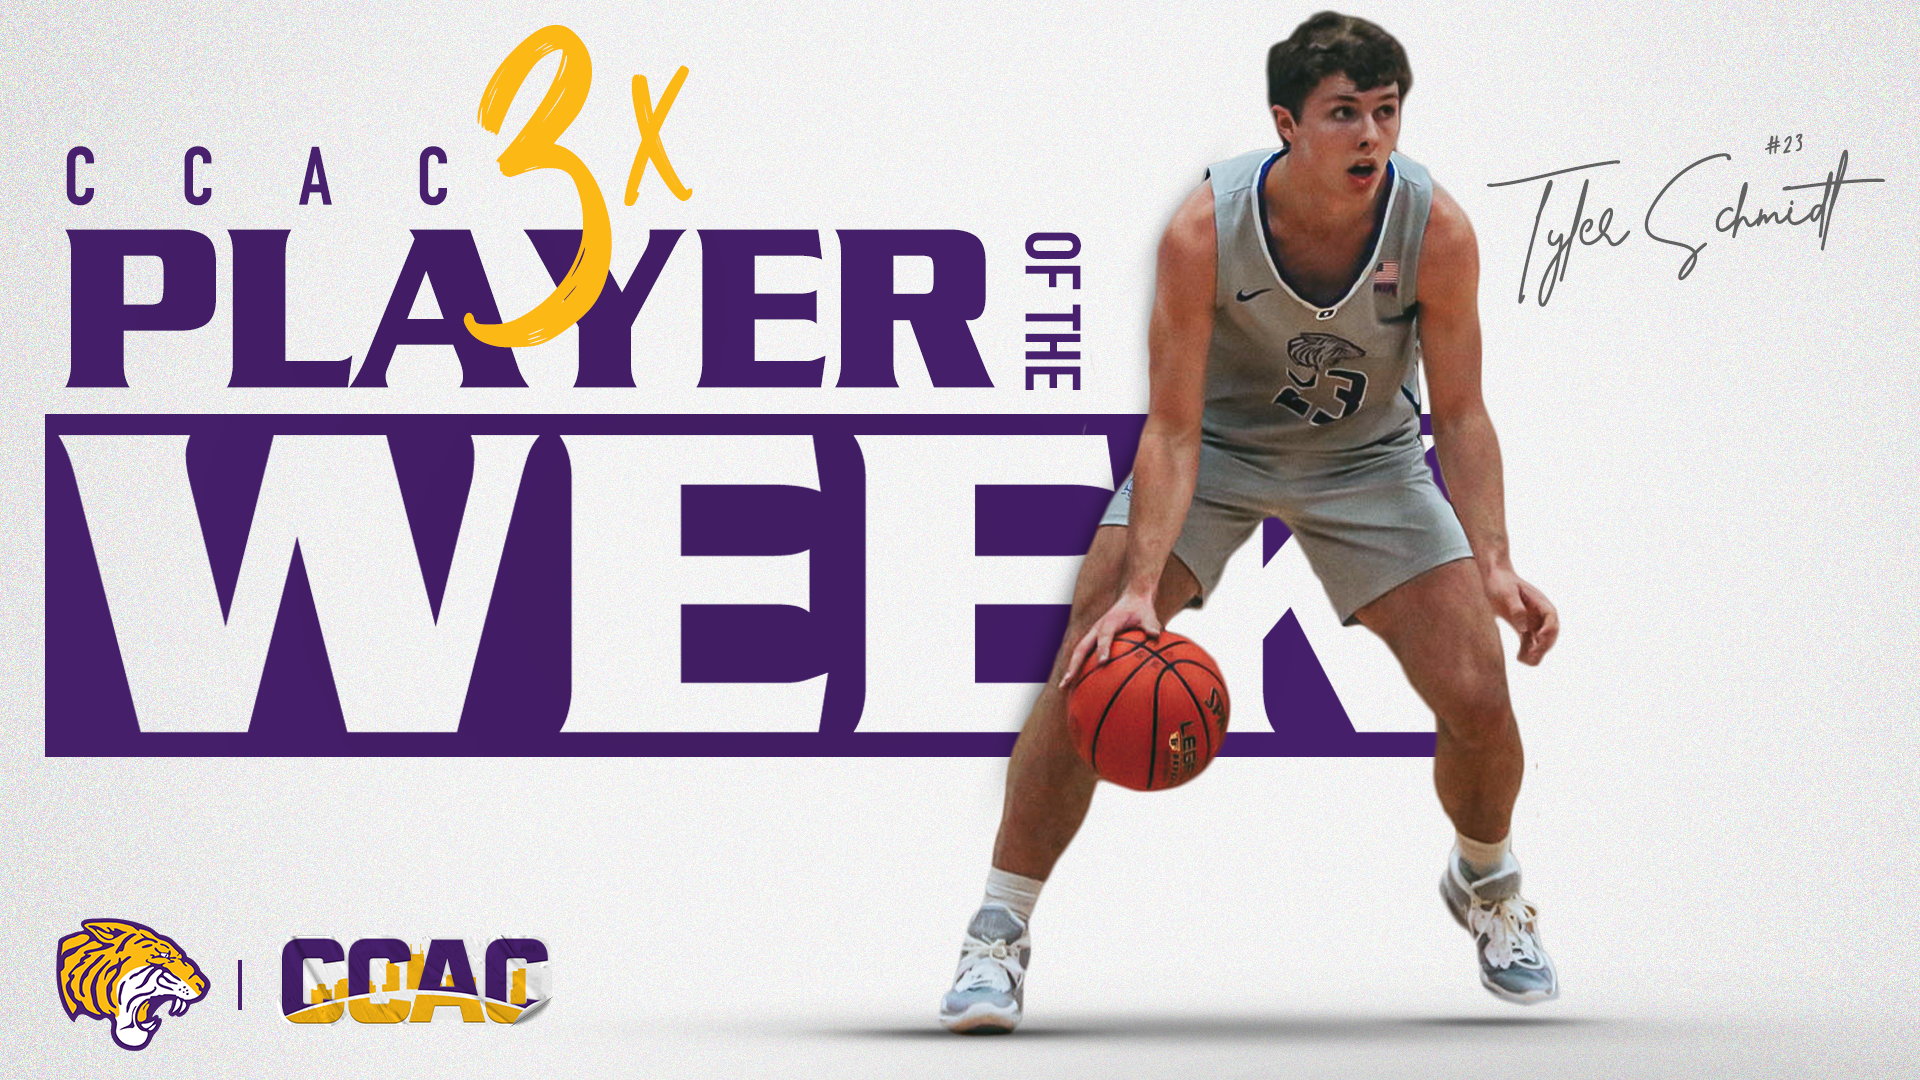 SCHMIDT MAKES ONU HISTORY, WINS THIRD-CONSECUTIVE CCAC PLAYER OF THE WEEK